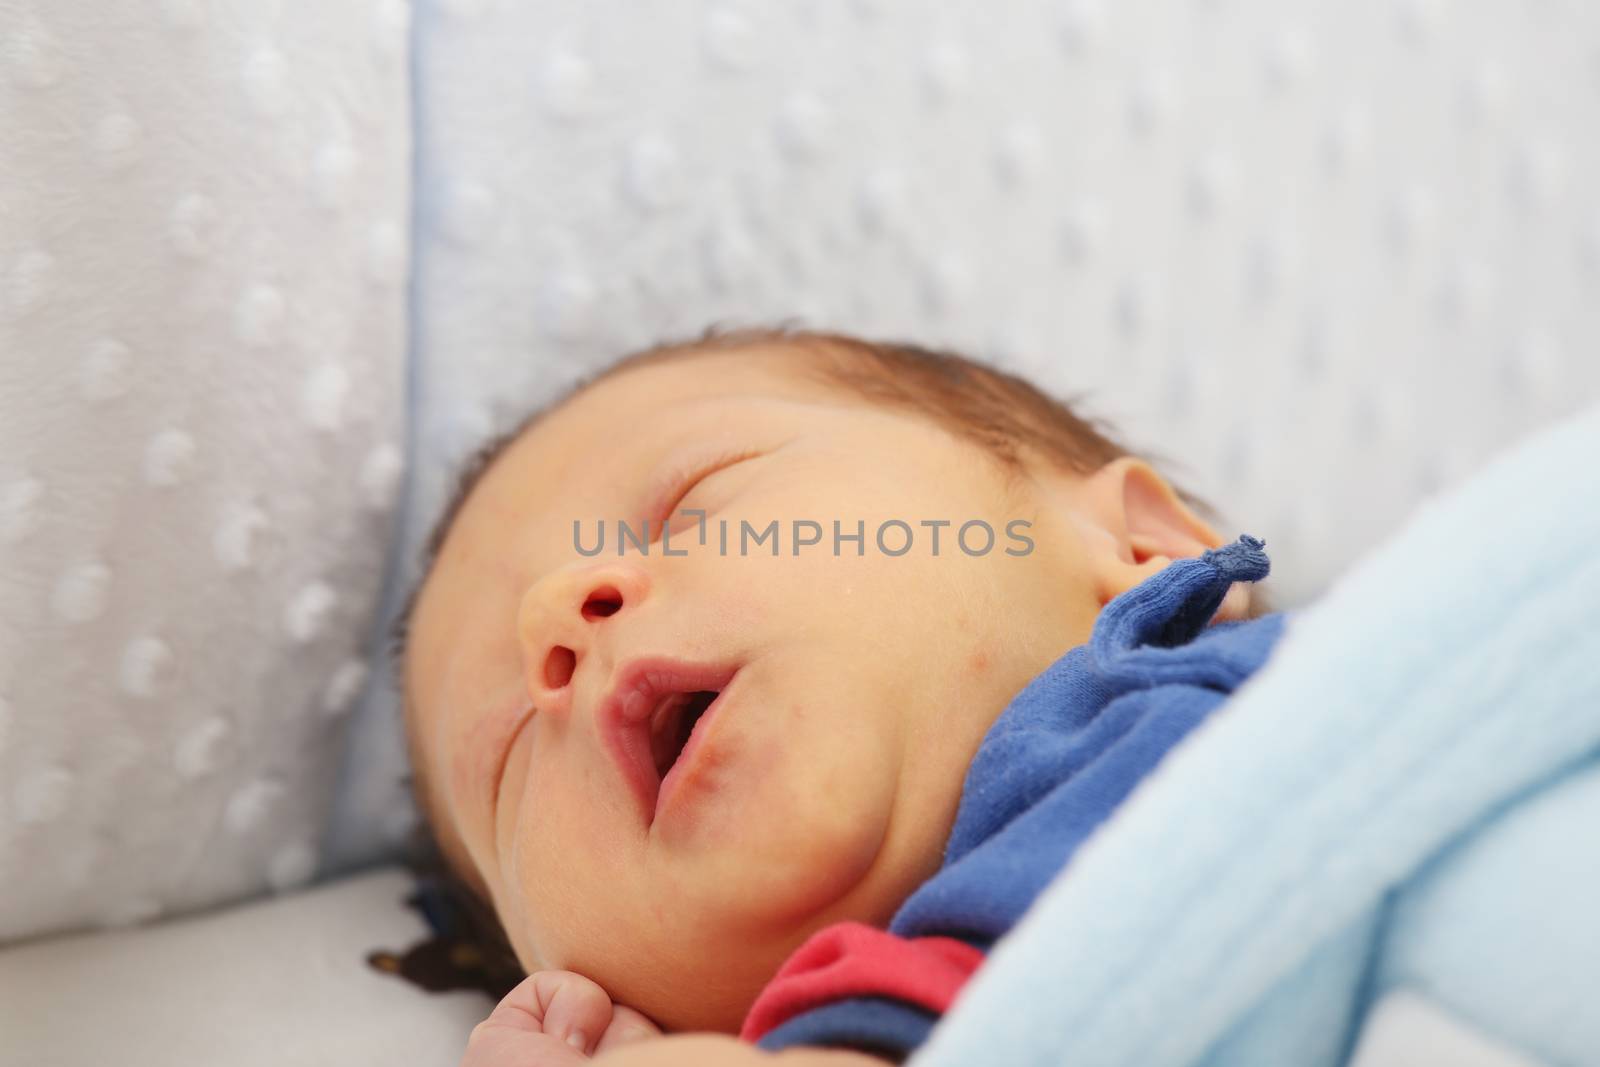 Newborn yawing. Focus in the mouth